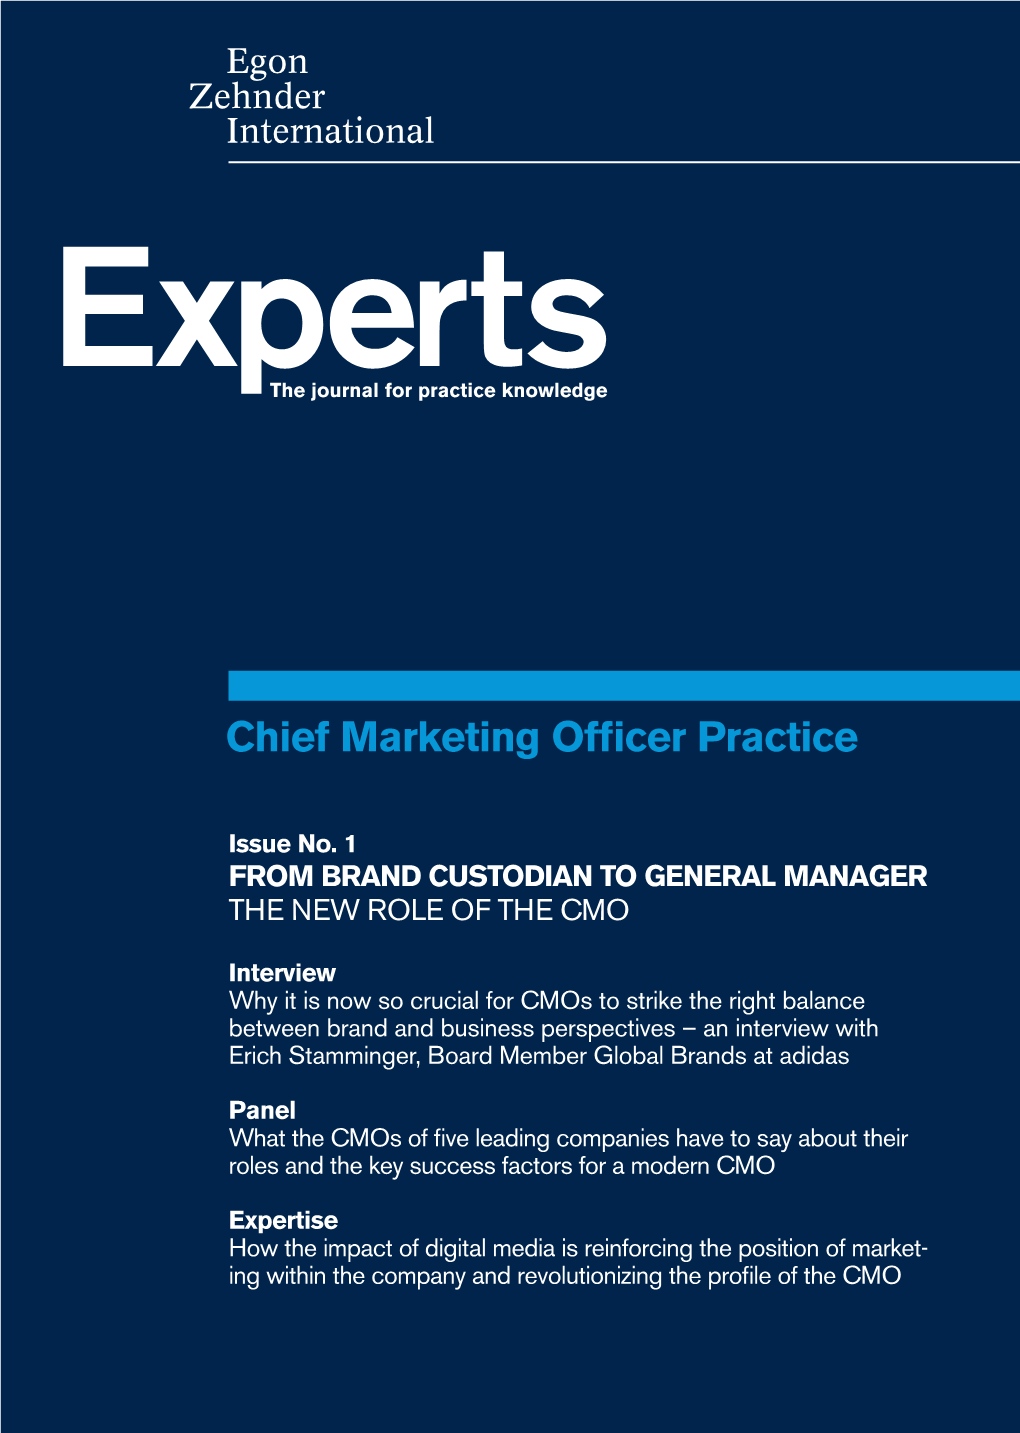 Chief Marketing Officer Practice